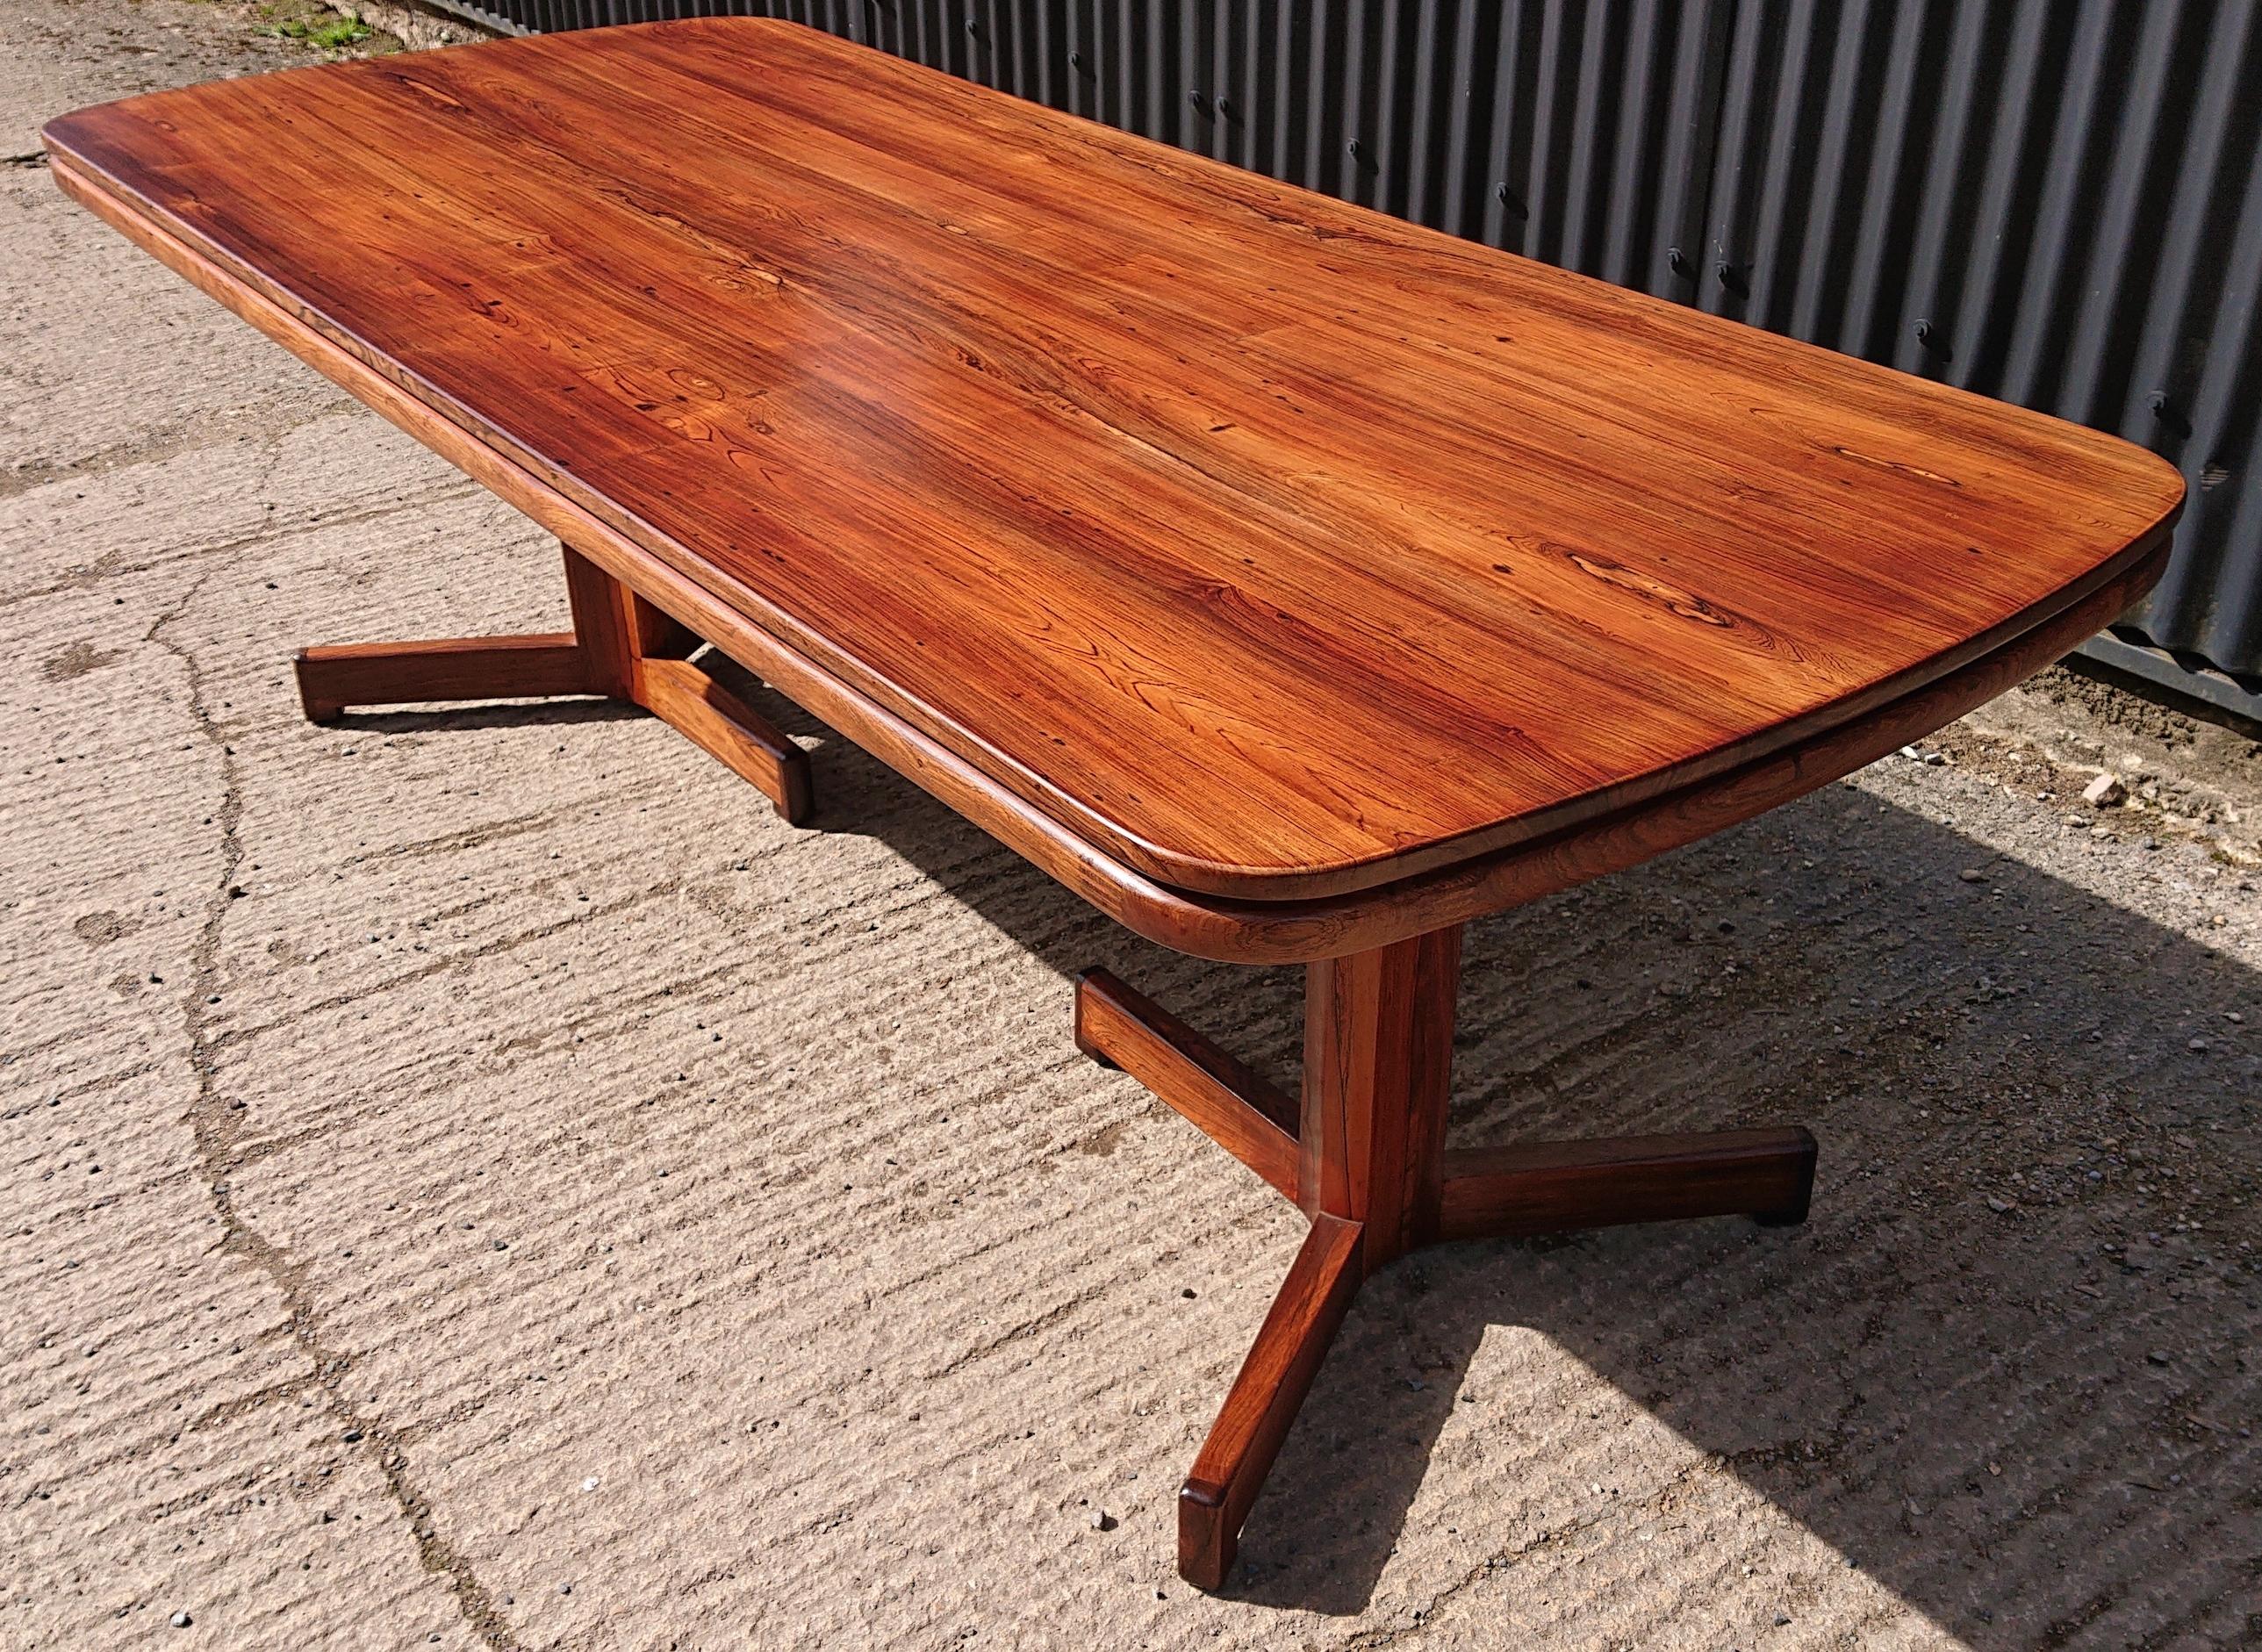 Extremely fine quality dining table designed by Michael Knott and made by Eric Bumstead in 1964. Michael Knott is a graduate of the Royal College of Art in London 